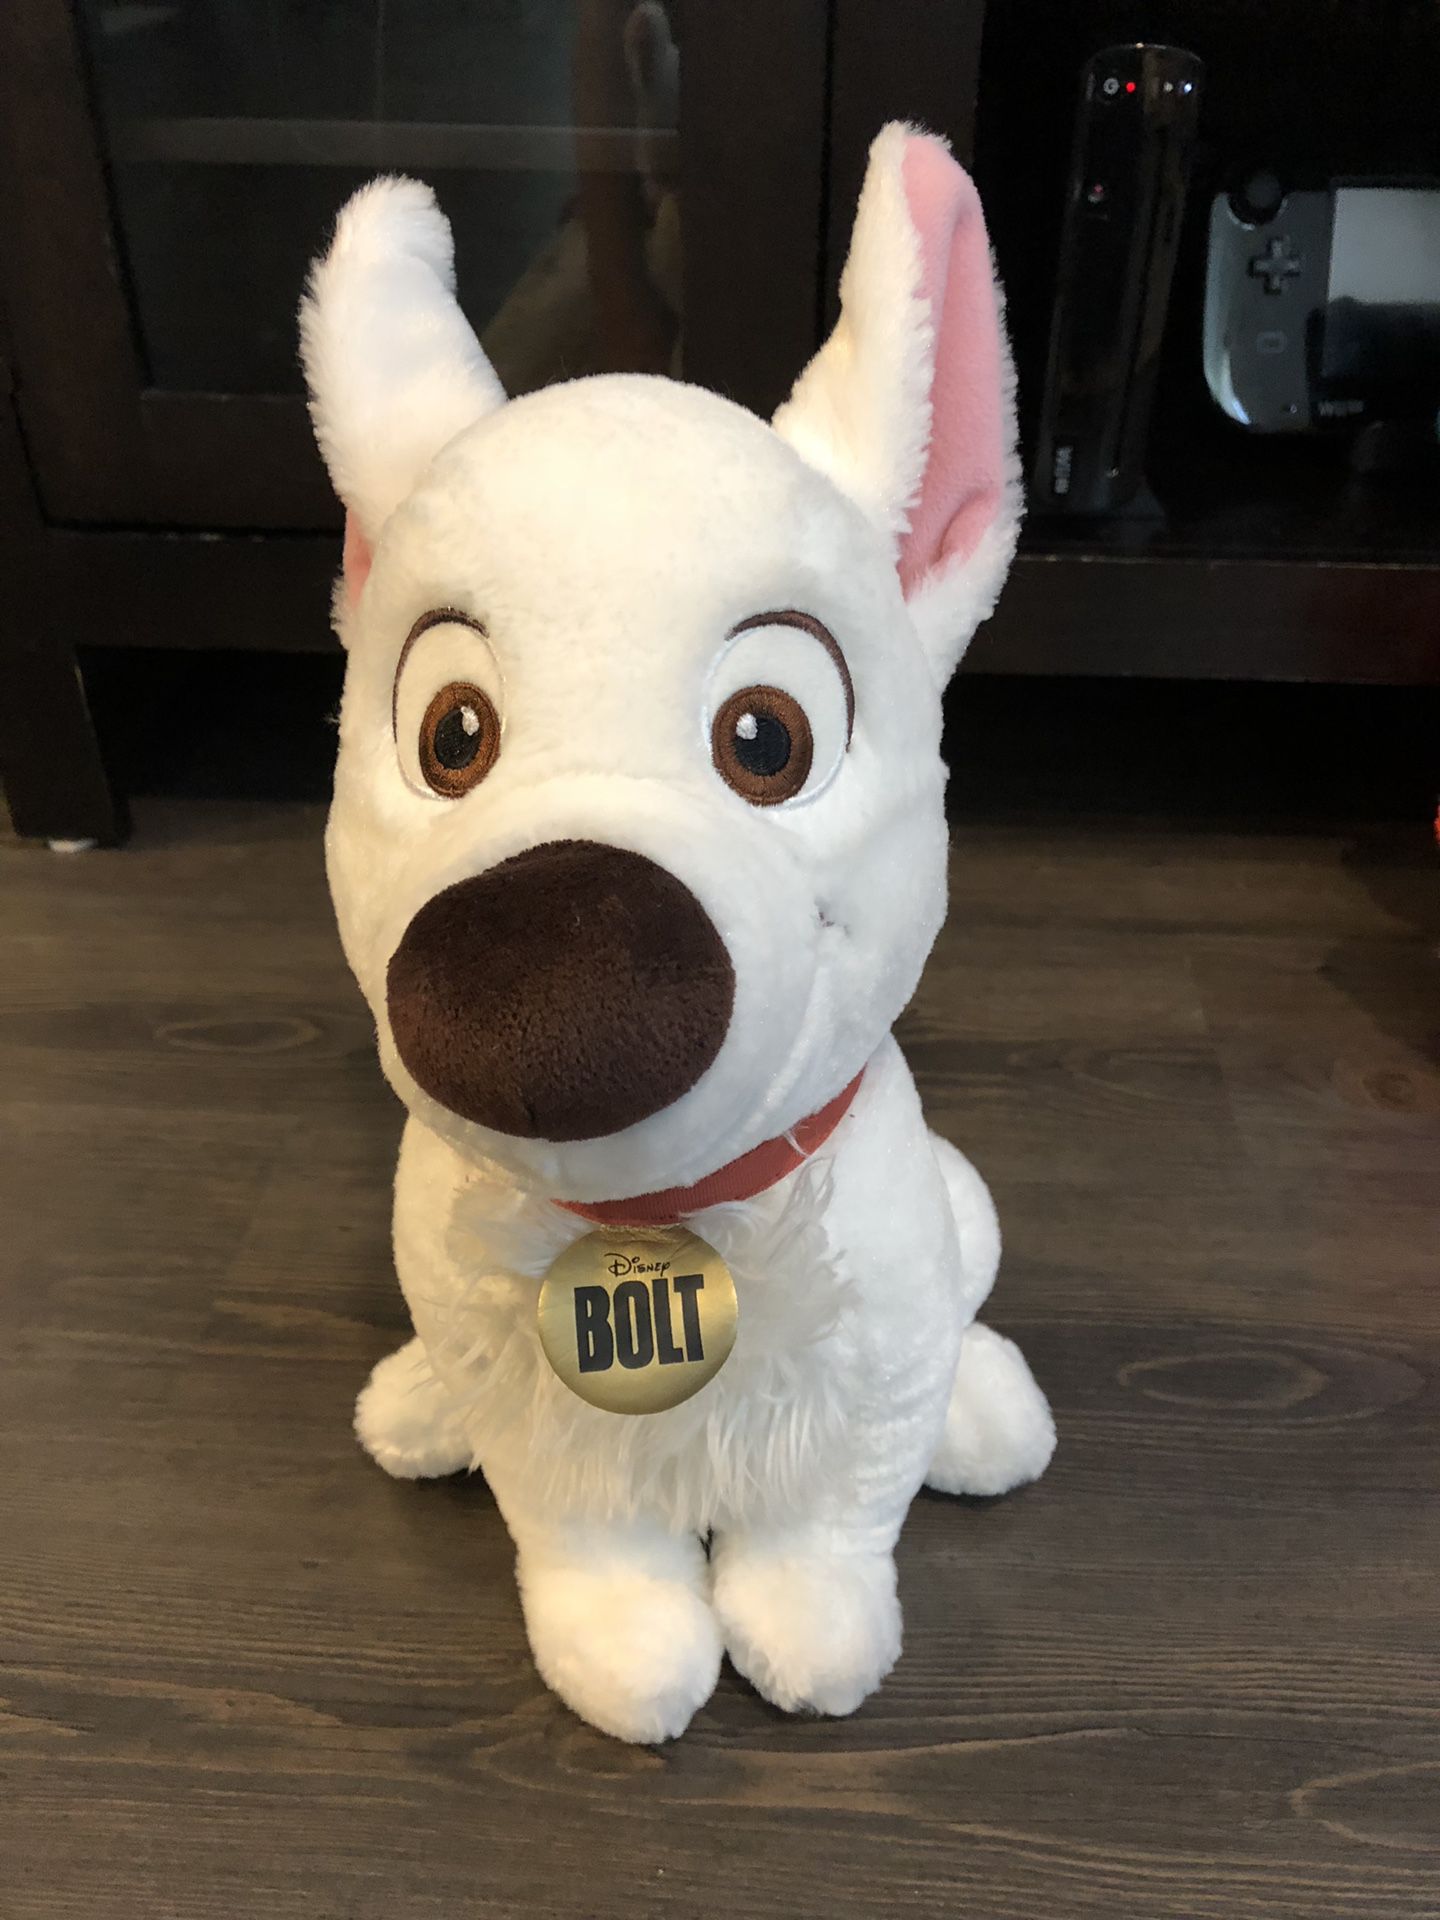 Disney Bolt Plush Doll Authentic From Disney Store for Sale in Parker, CO -  OfferUp